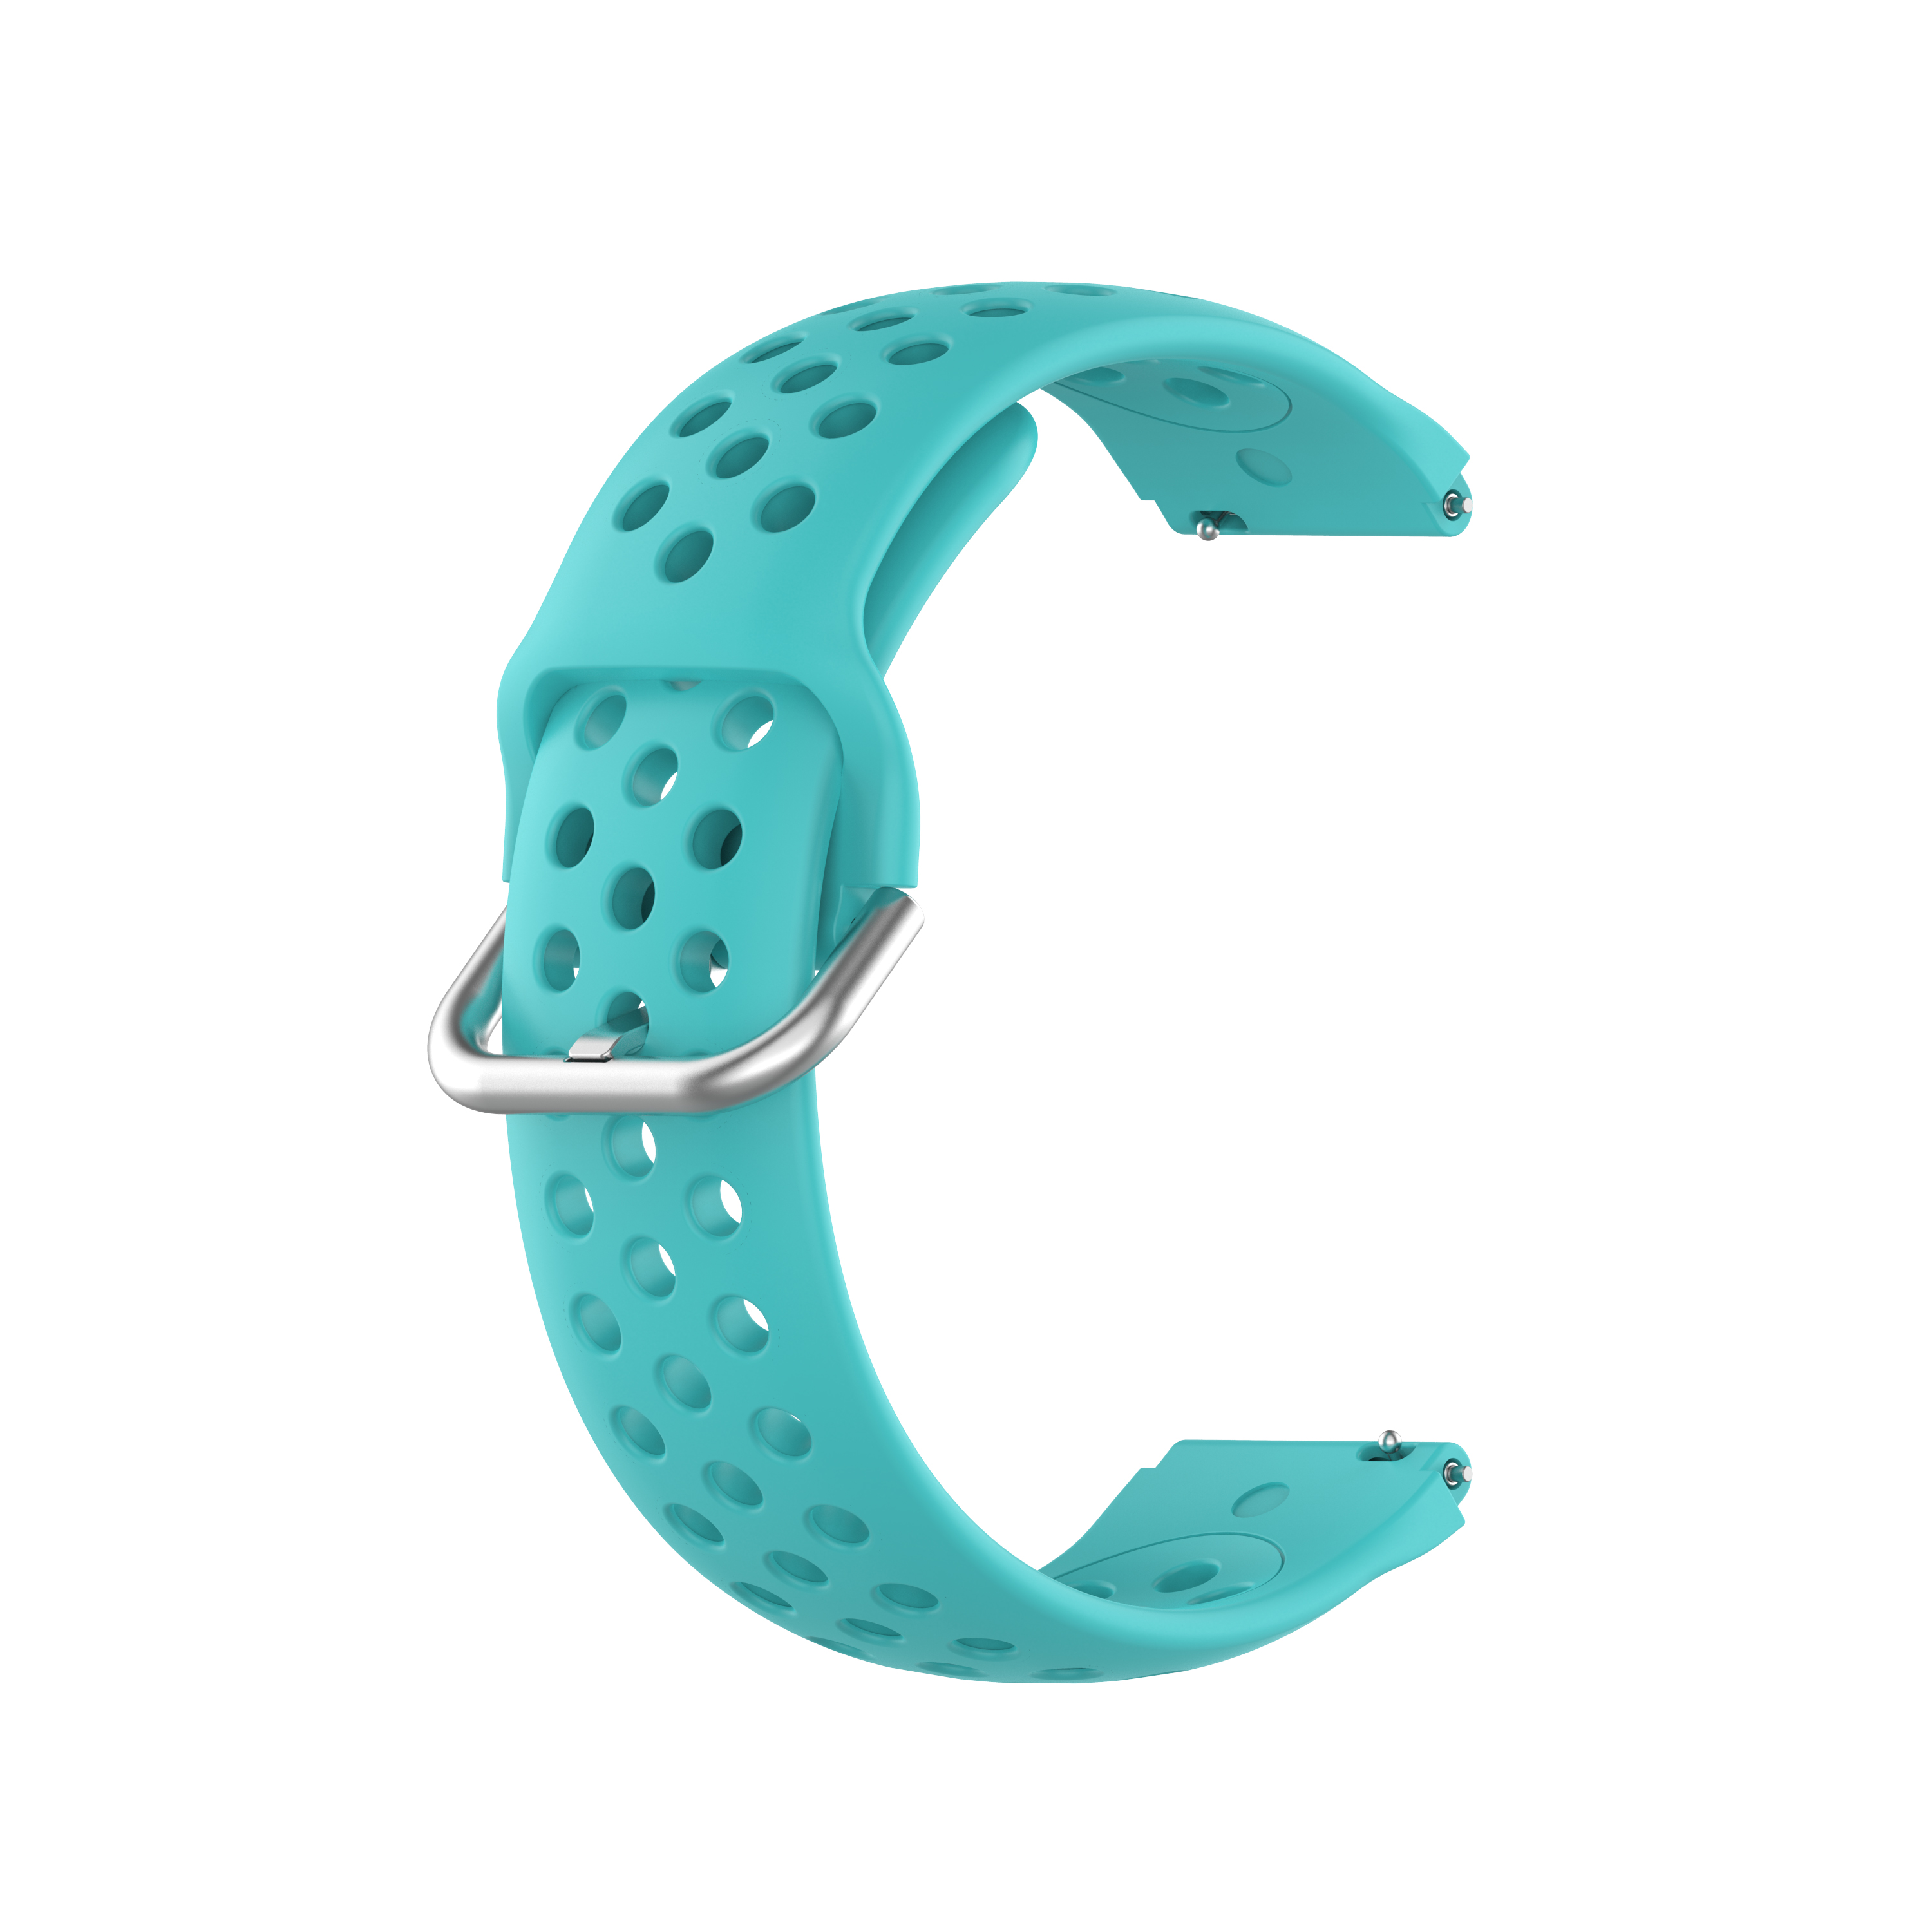 Bakeey-18mm-Stomatal-Silicone-Smart-Watch-Band-Replacement-Strap-For-Xiaomi-Smart-Watch-Non-original-1668524-17